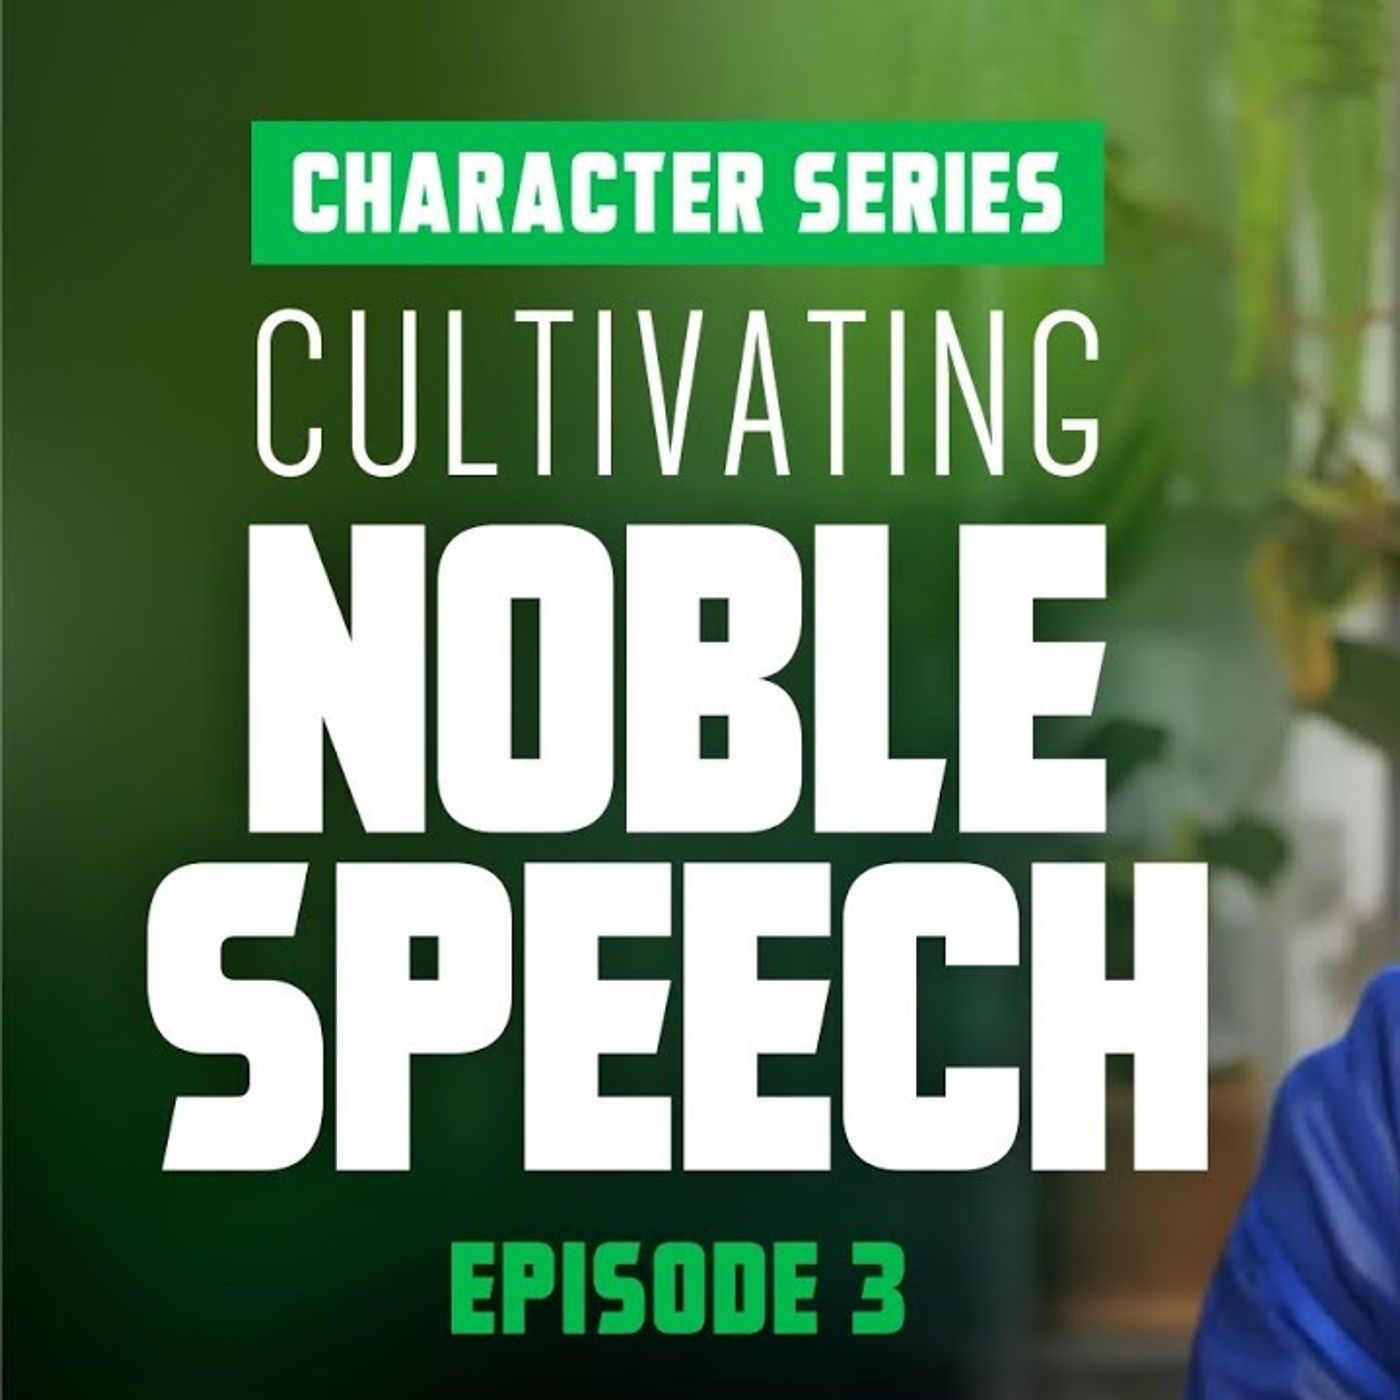 Cultivating Noble Speech - Character Series - EP3